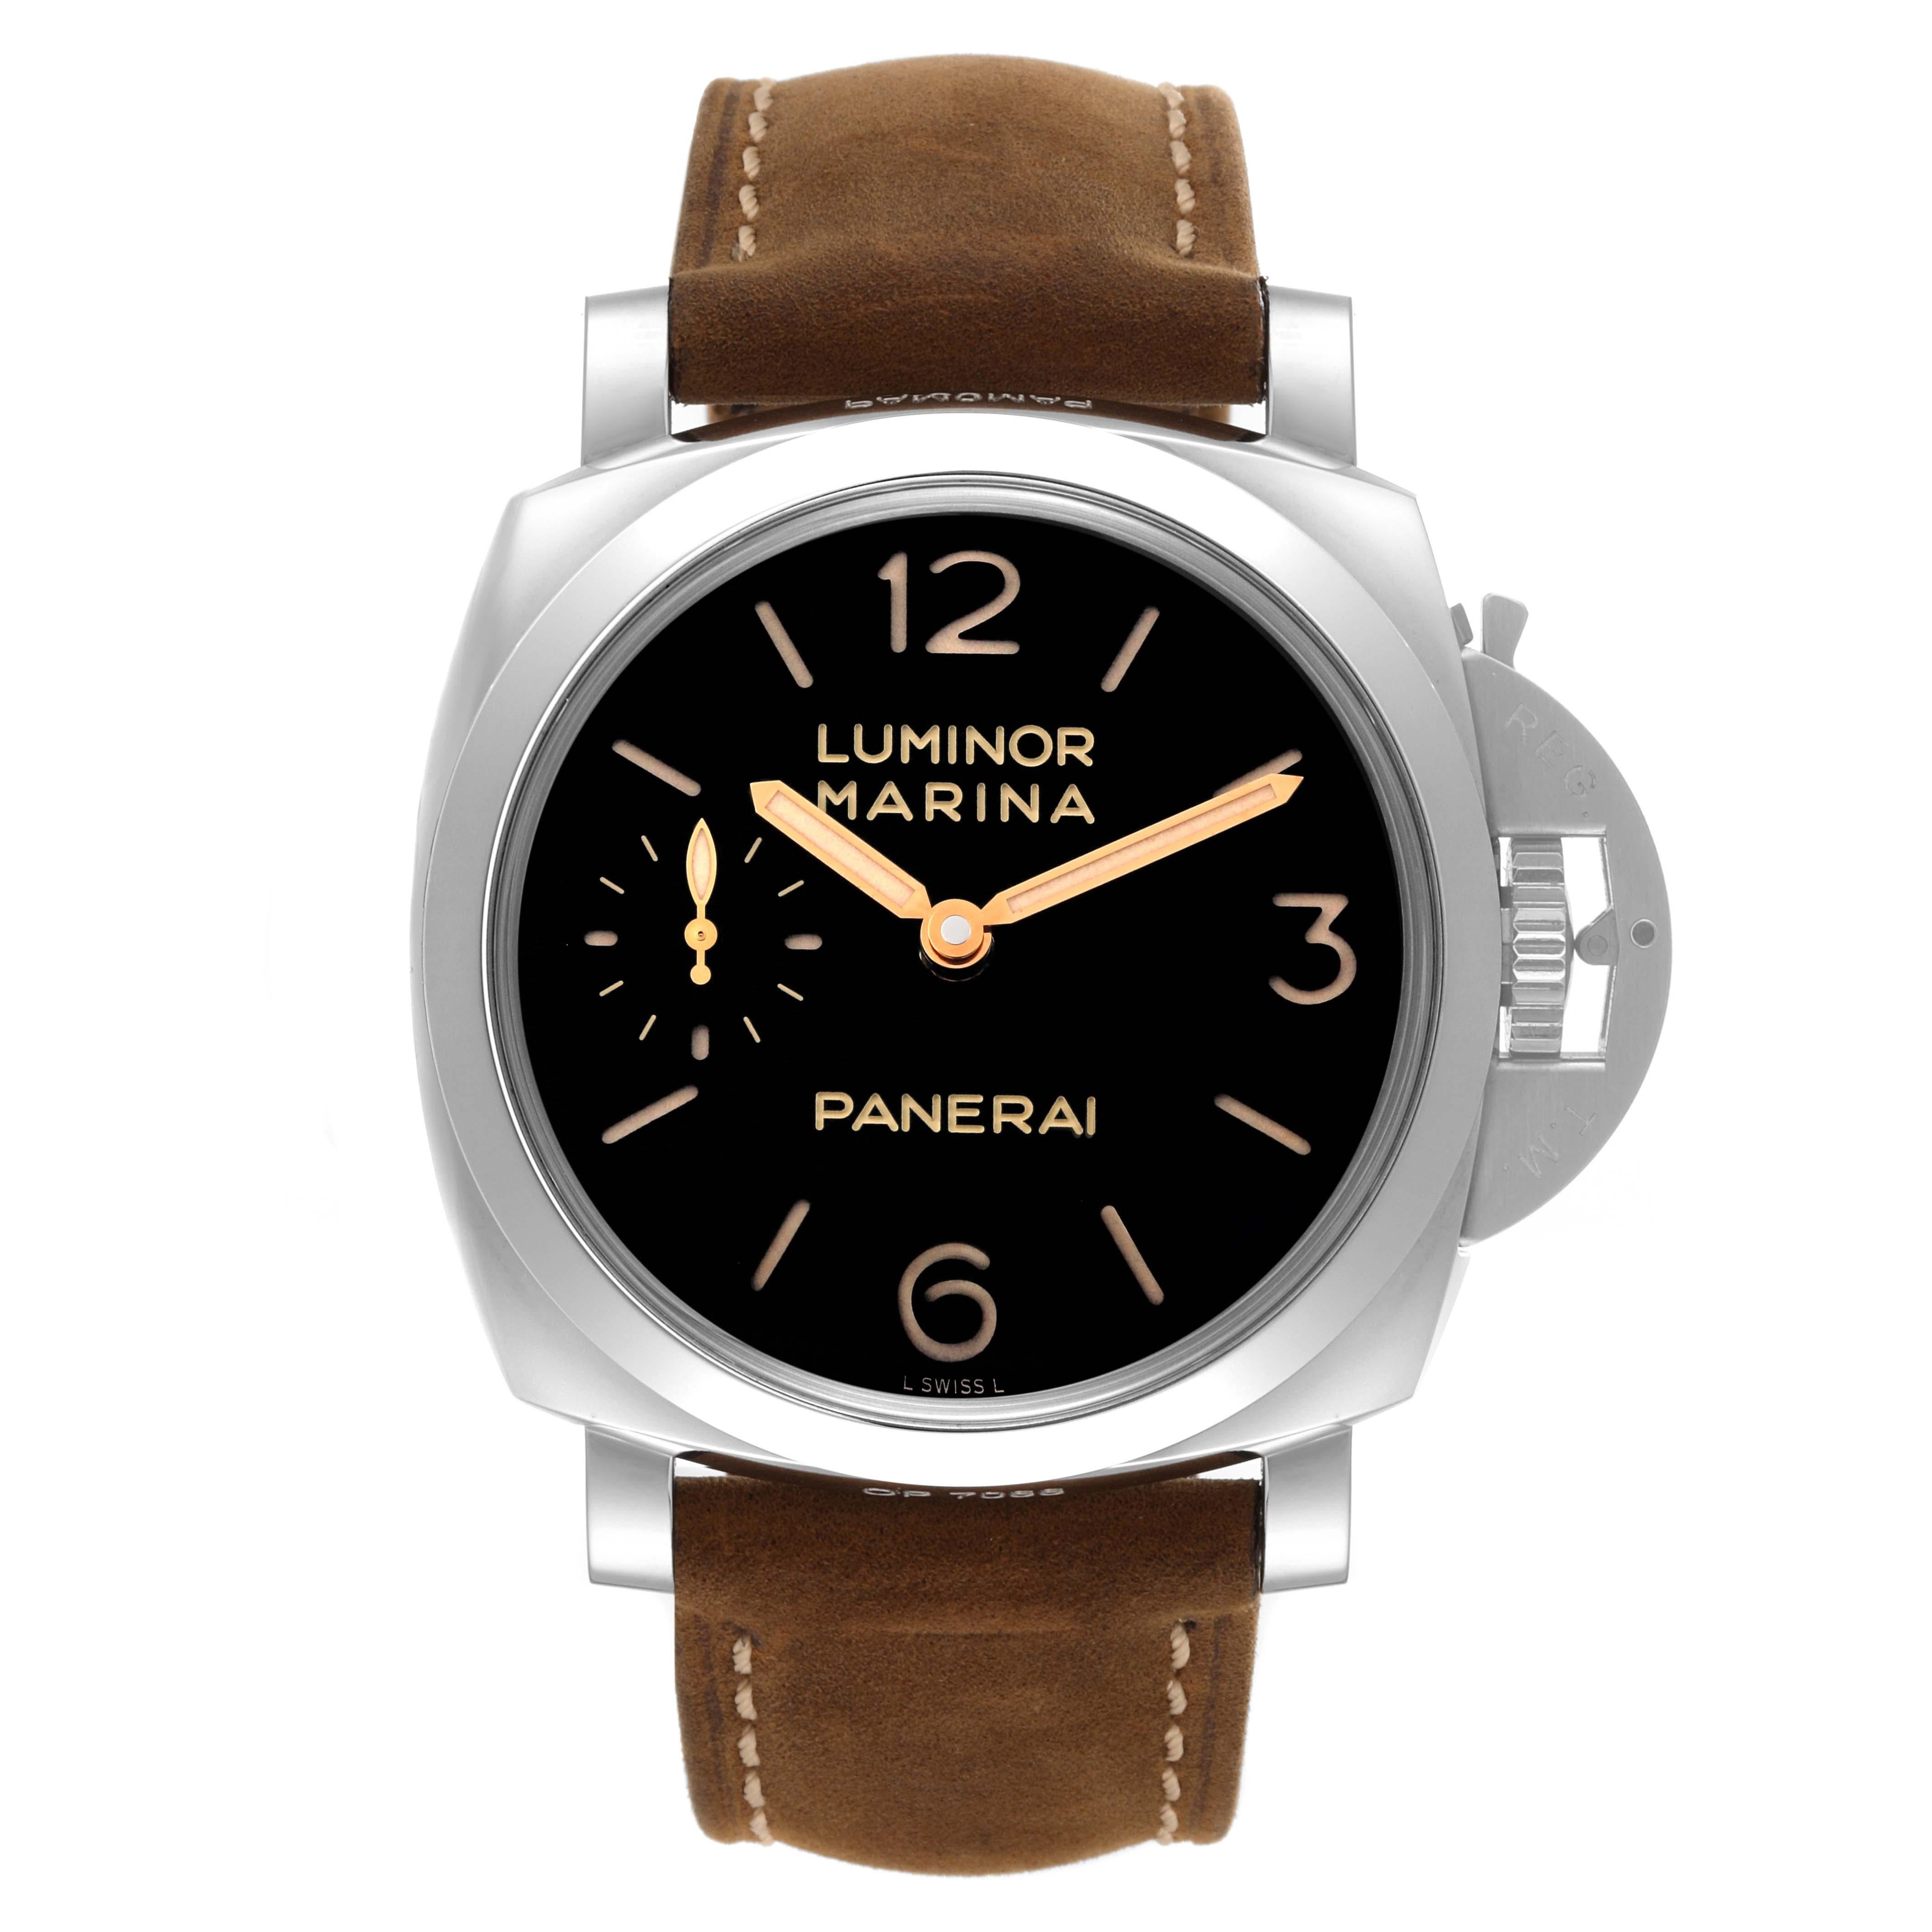 Panerai Luminor Marina 3 Days Power Reserve Steel Mens Watch PAM00422 Box Papers. Manual winding movement with 3 day power reserve indicator. Stainless steel cushion shaped case 47 mm in diameter. Panerai patented crown protector. Transparent